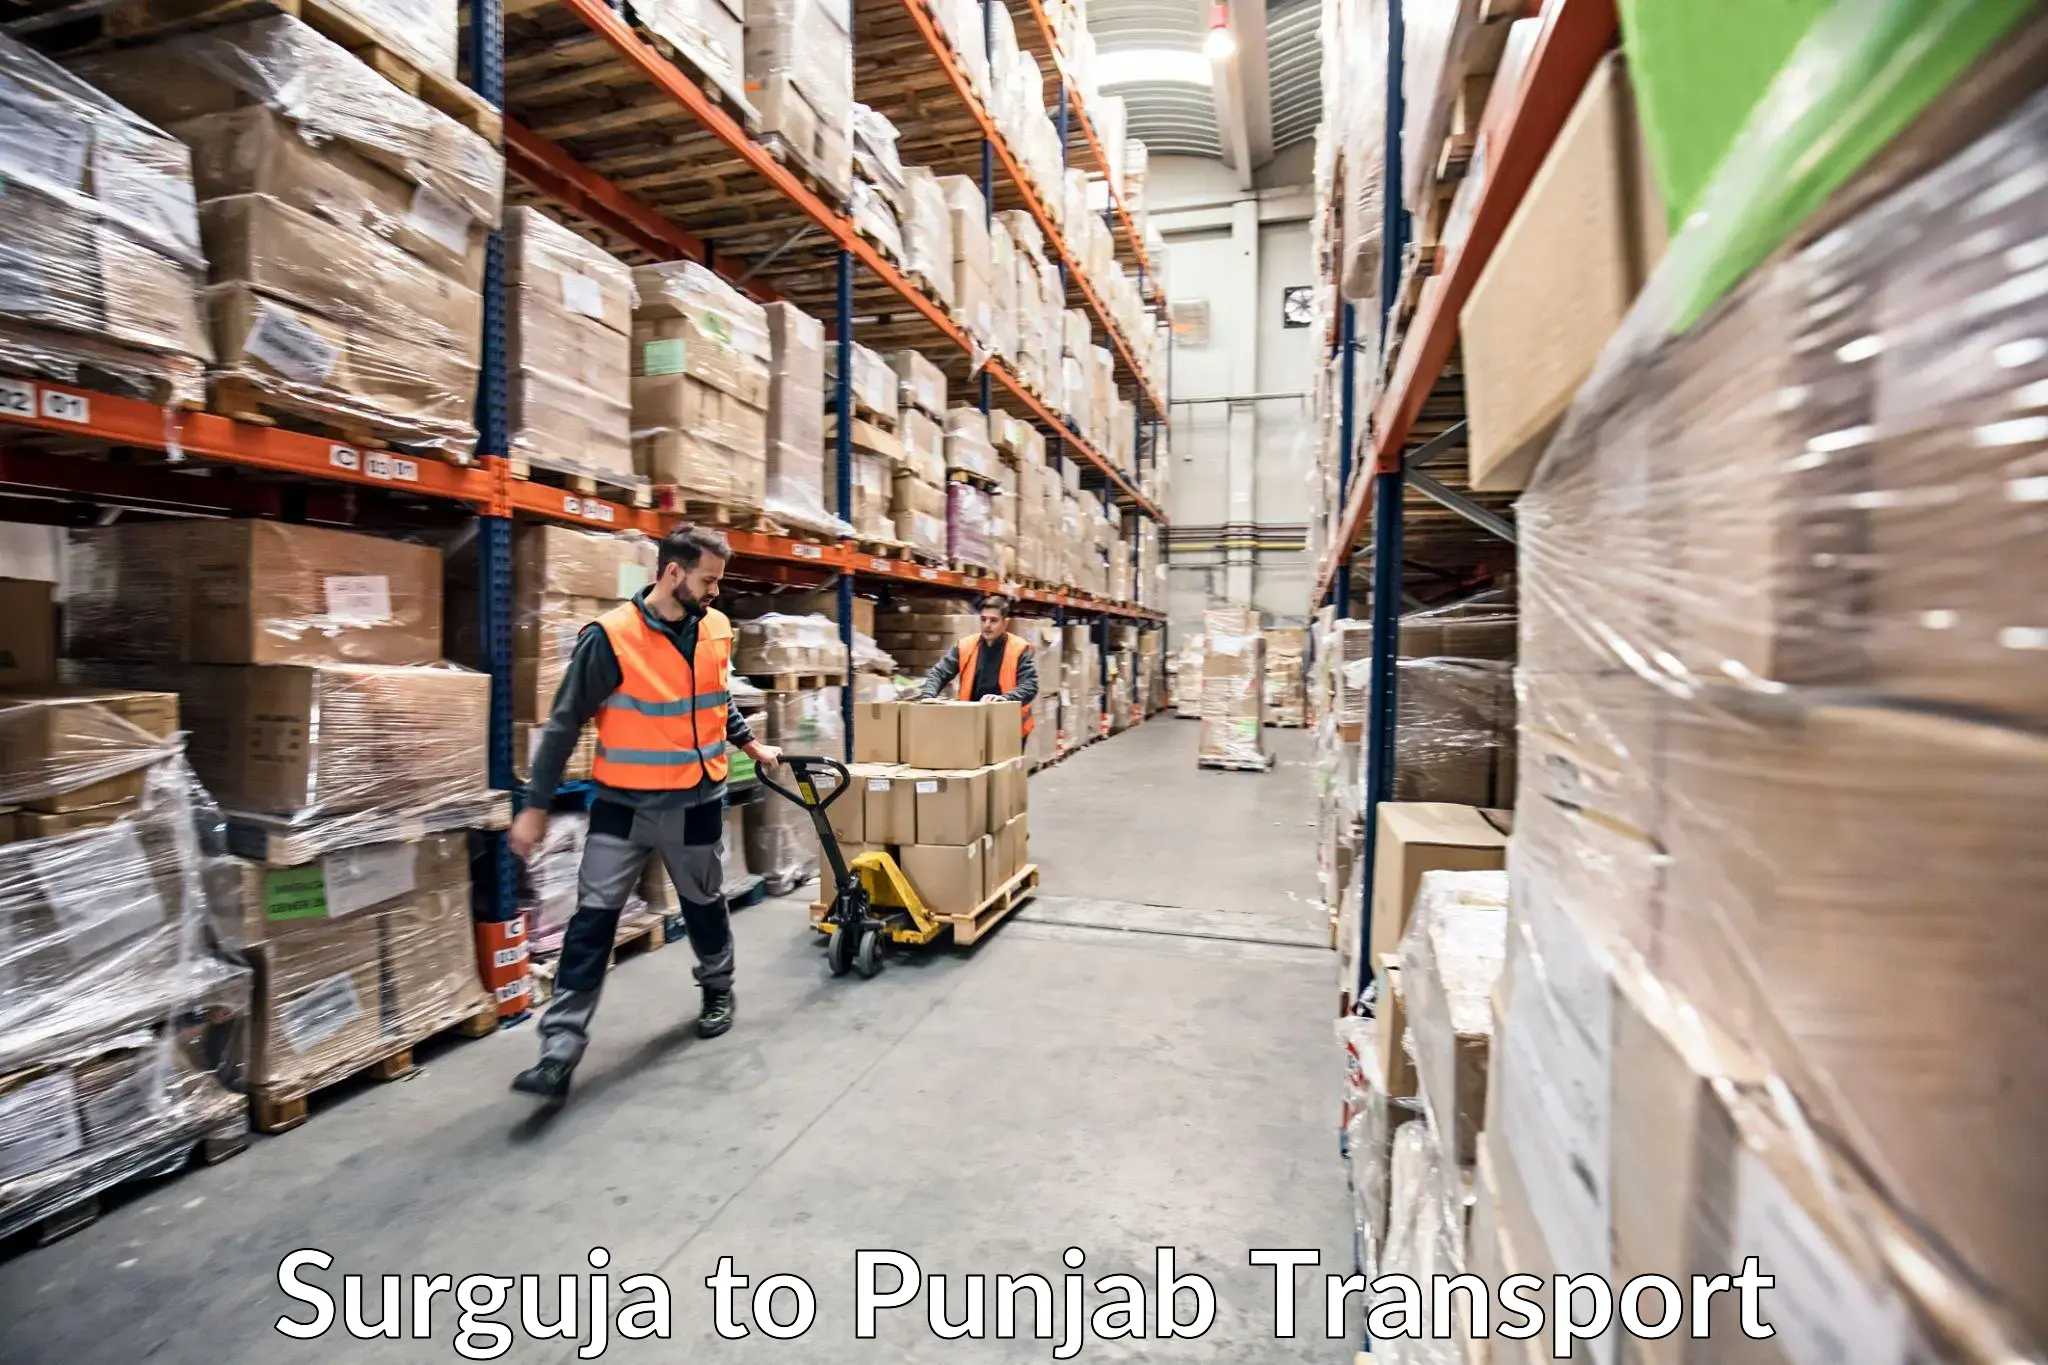 Commercial transport service Surguja to Amritsar